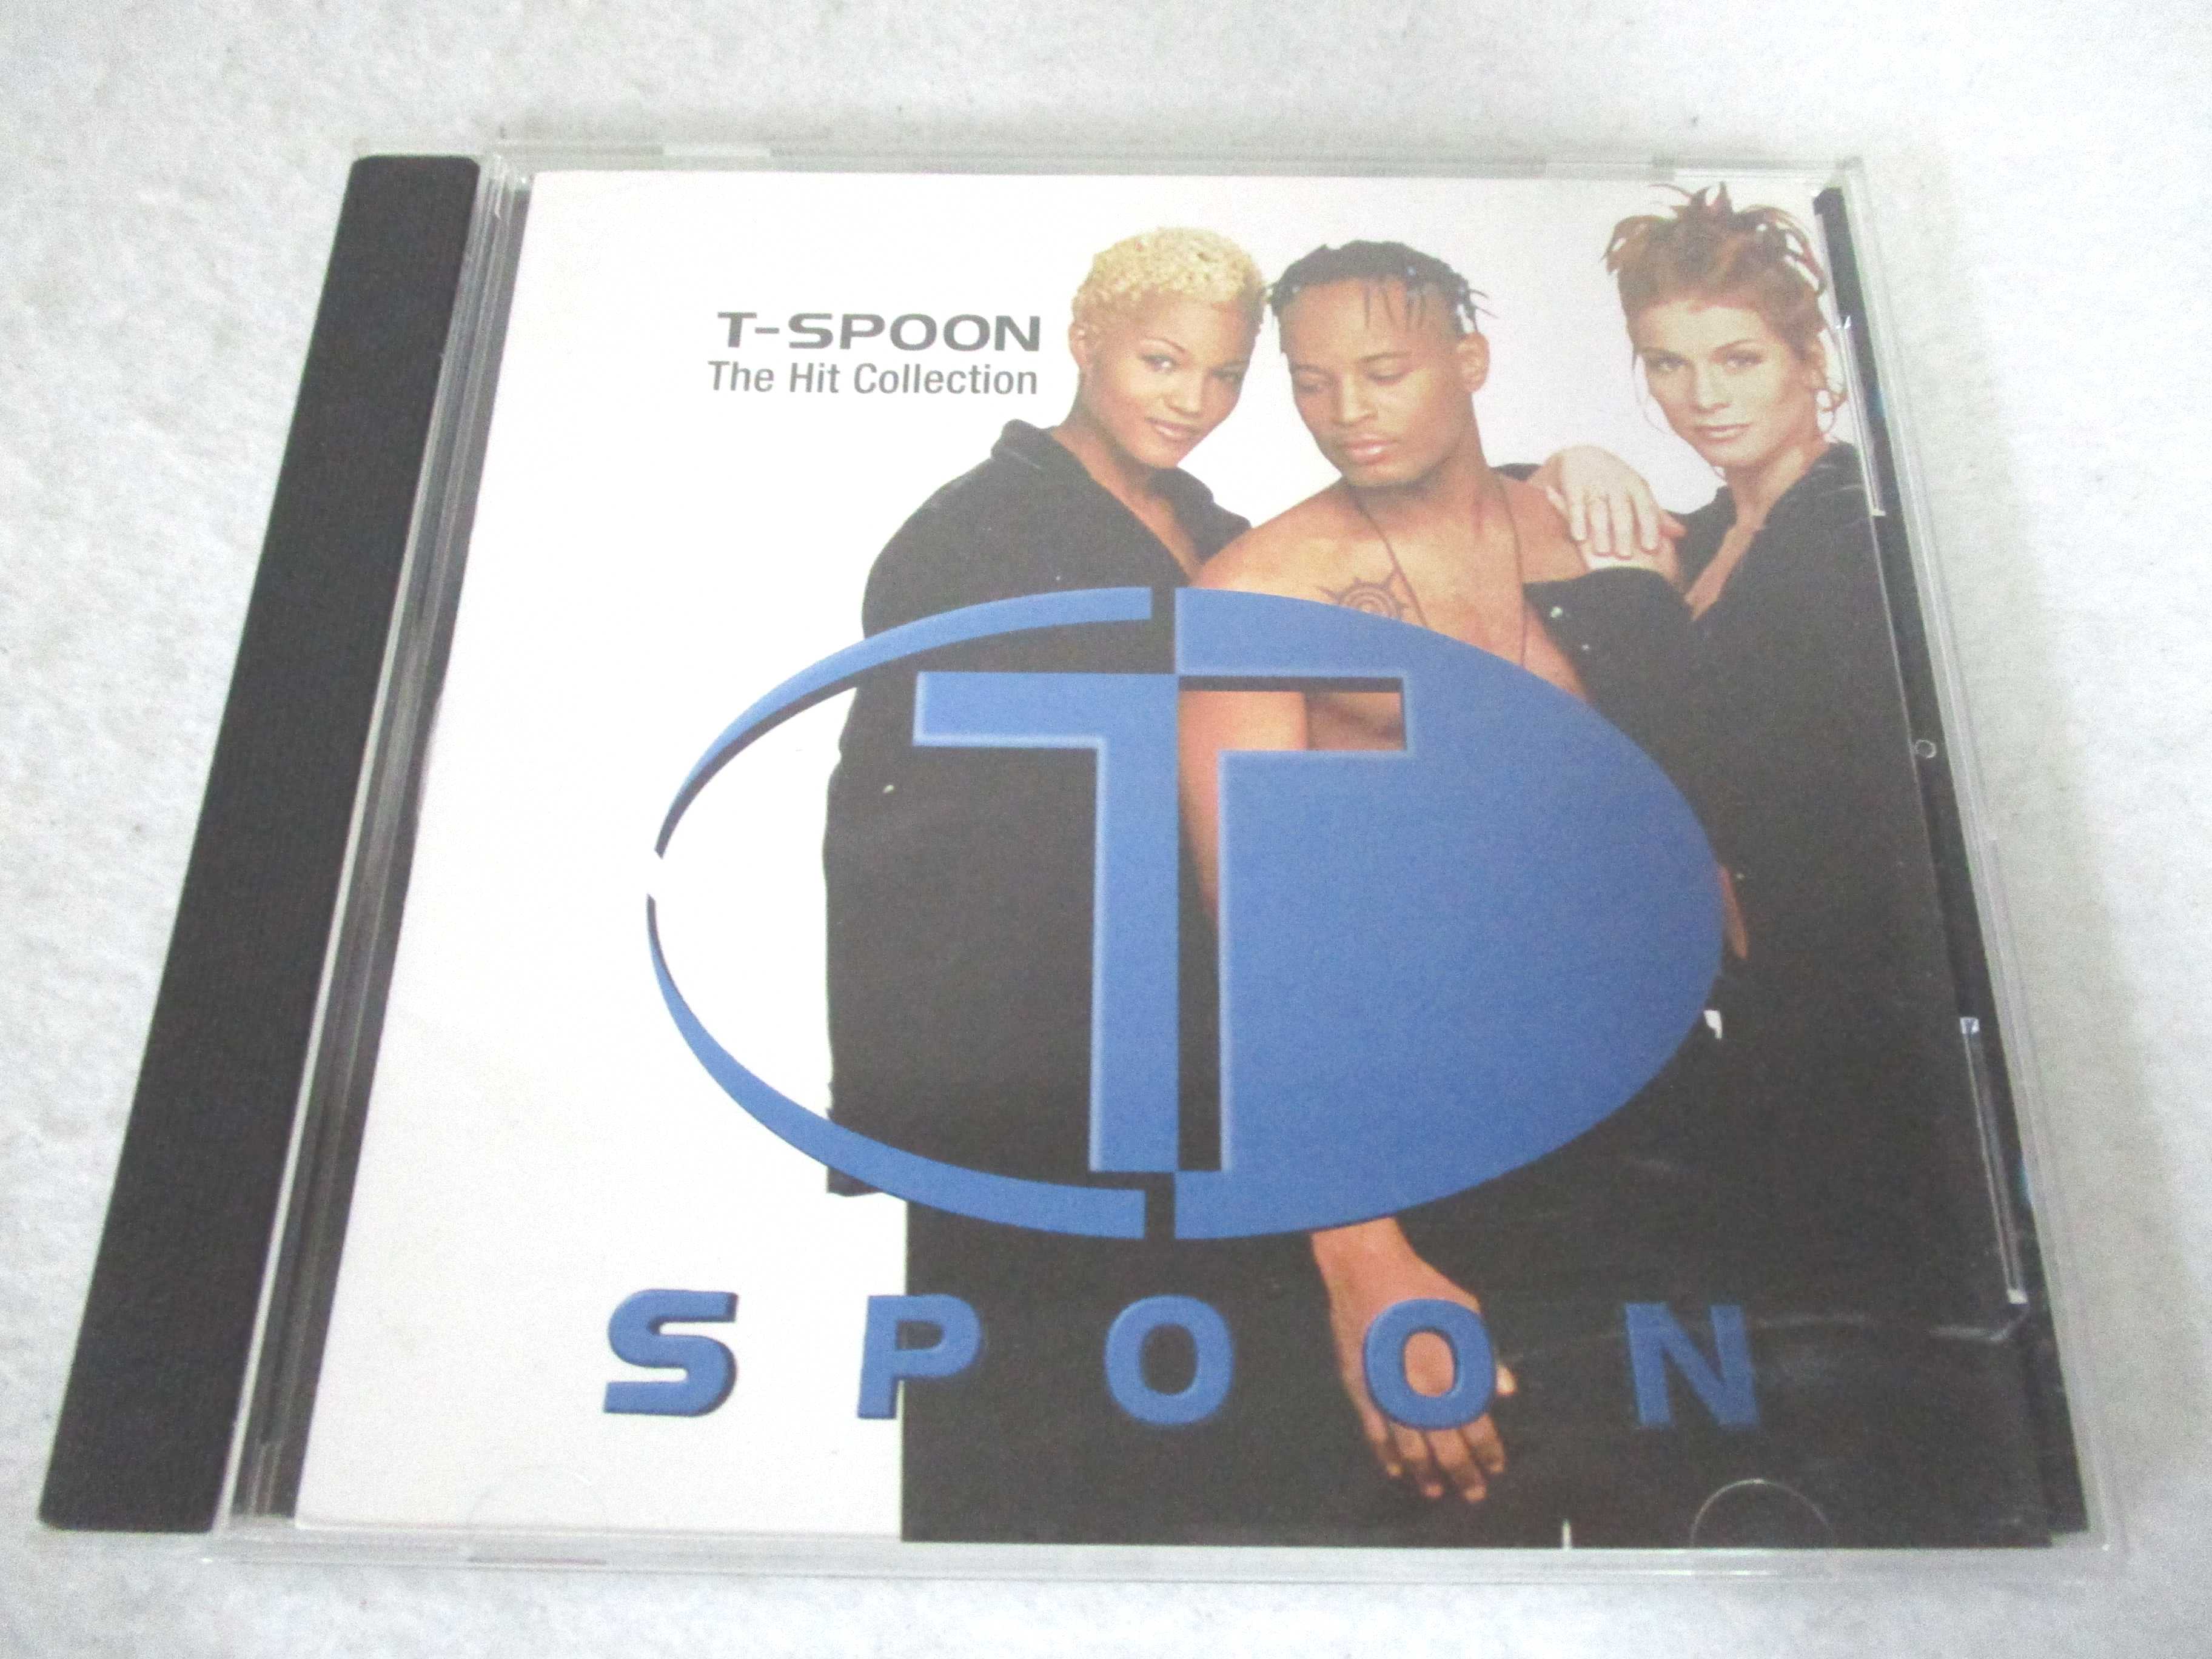 AC02500 yÁz yCDz The Hit Collection/T-SPOON